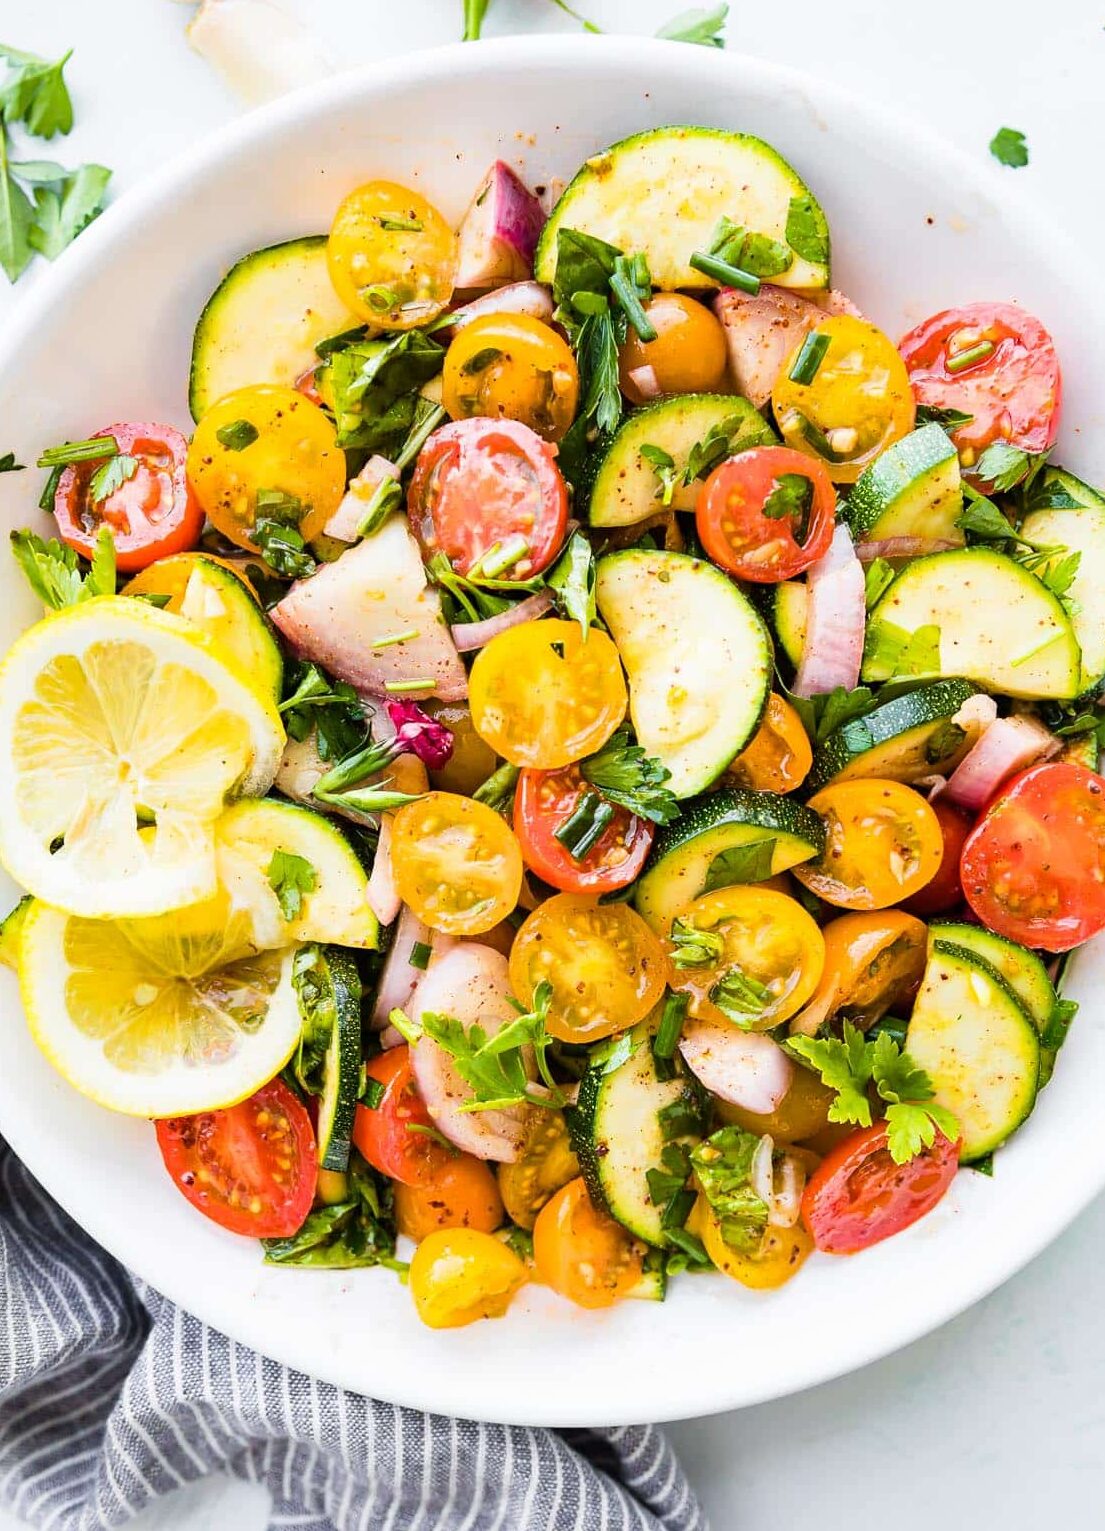 healthy marinated vegetables salad with tomatoes and zucchini.